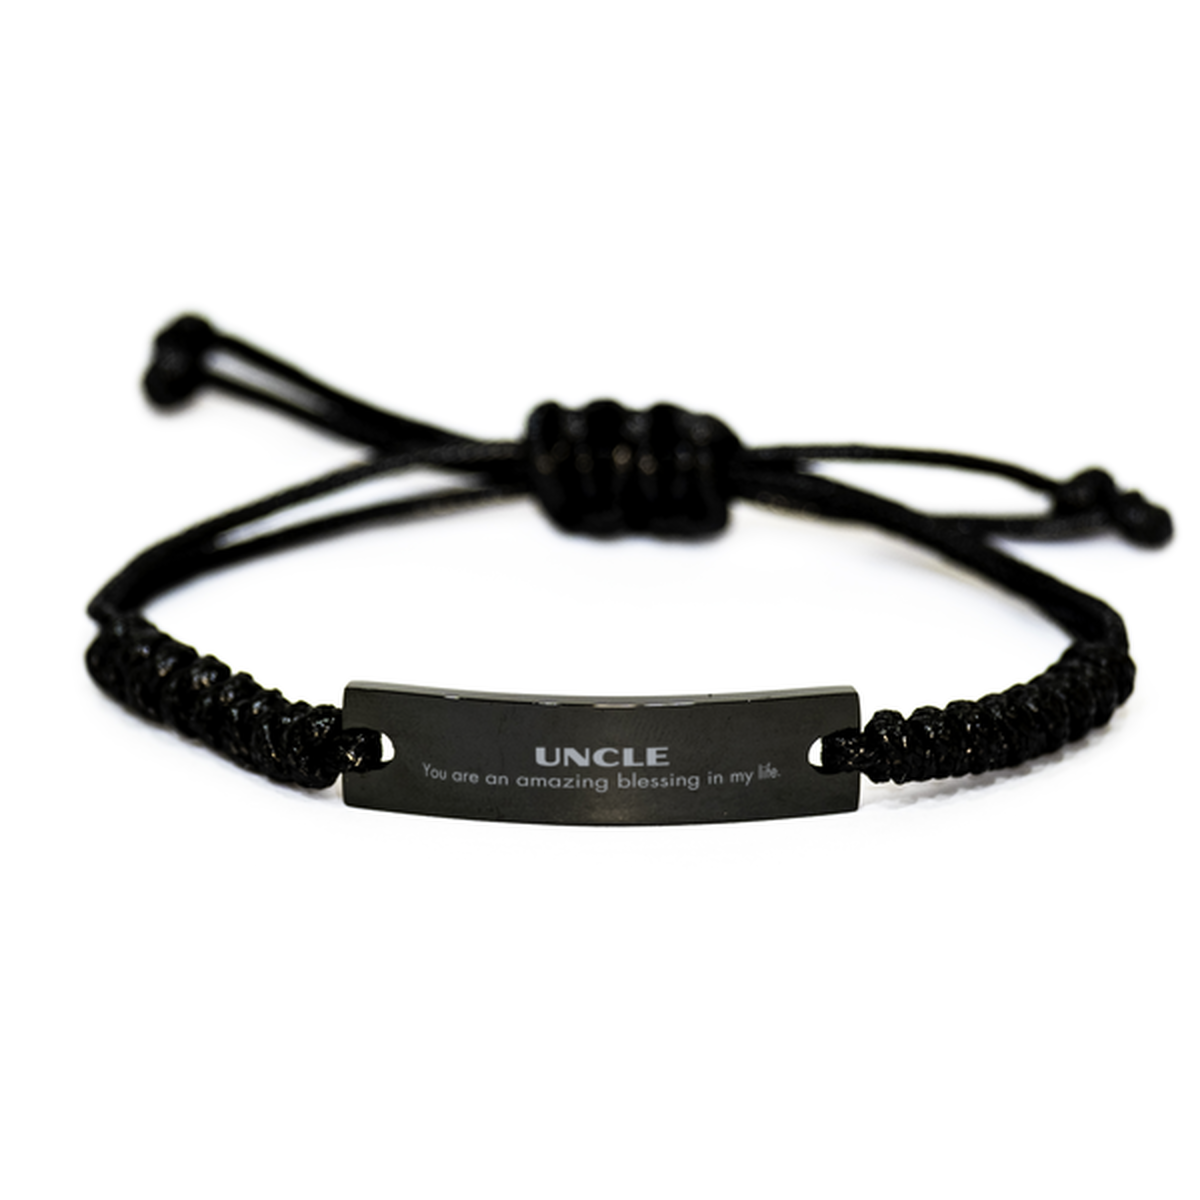 Uncle Black Rope Bracelet, You are an amazing blessing in my life, Thank You Gifts For Uncle, Inspirational Birthday Christmas Unique Gifts For Uncle